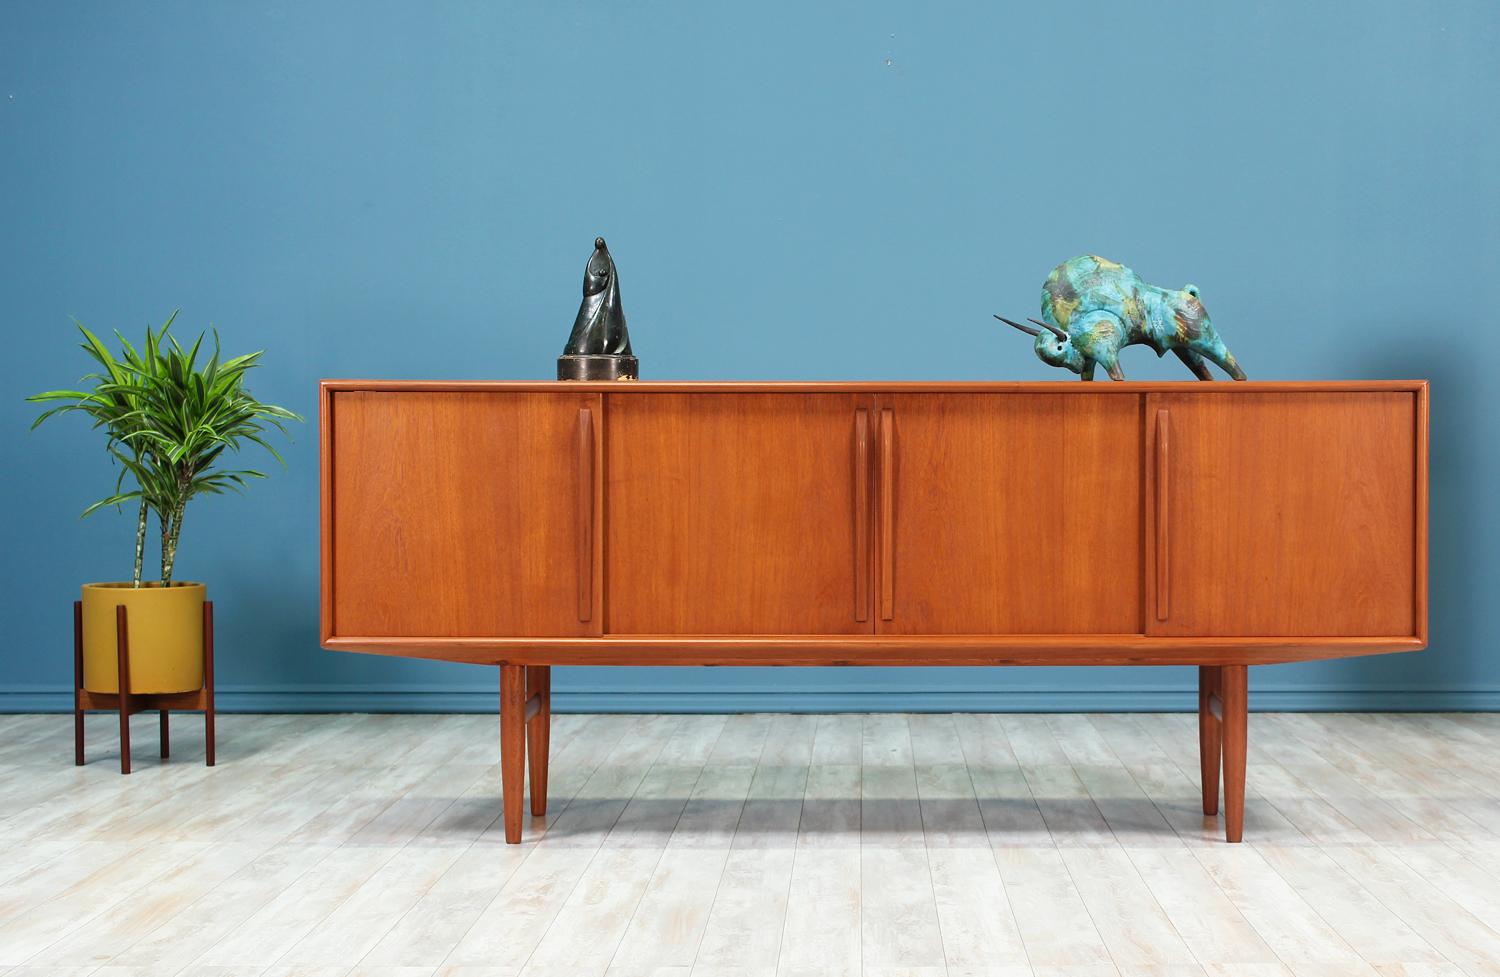 Spacious Danish Modern teak credenza designed by Kurt Østervig for Brande Møbelindustri in Denmark circa 1950’s. The subtle minimalistic details on this teak credenza reflect the expert craftsmanship put into making this design. The front features